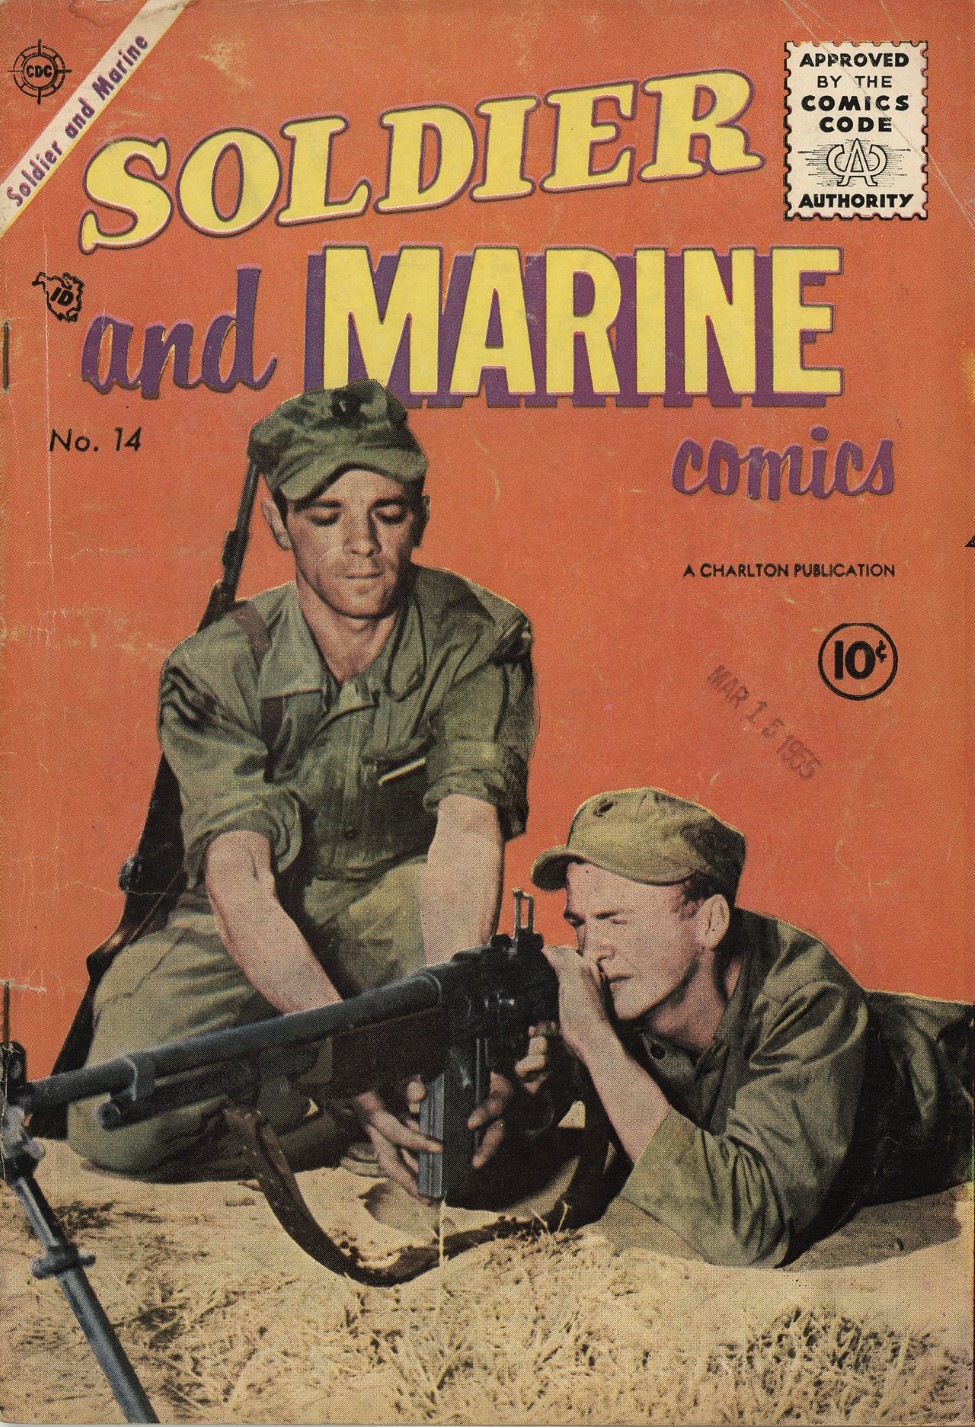 Comic Book Cover For Soldier and Marine Comics 14 (alt) - Version 2